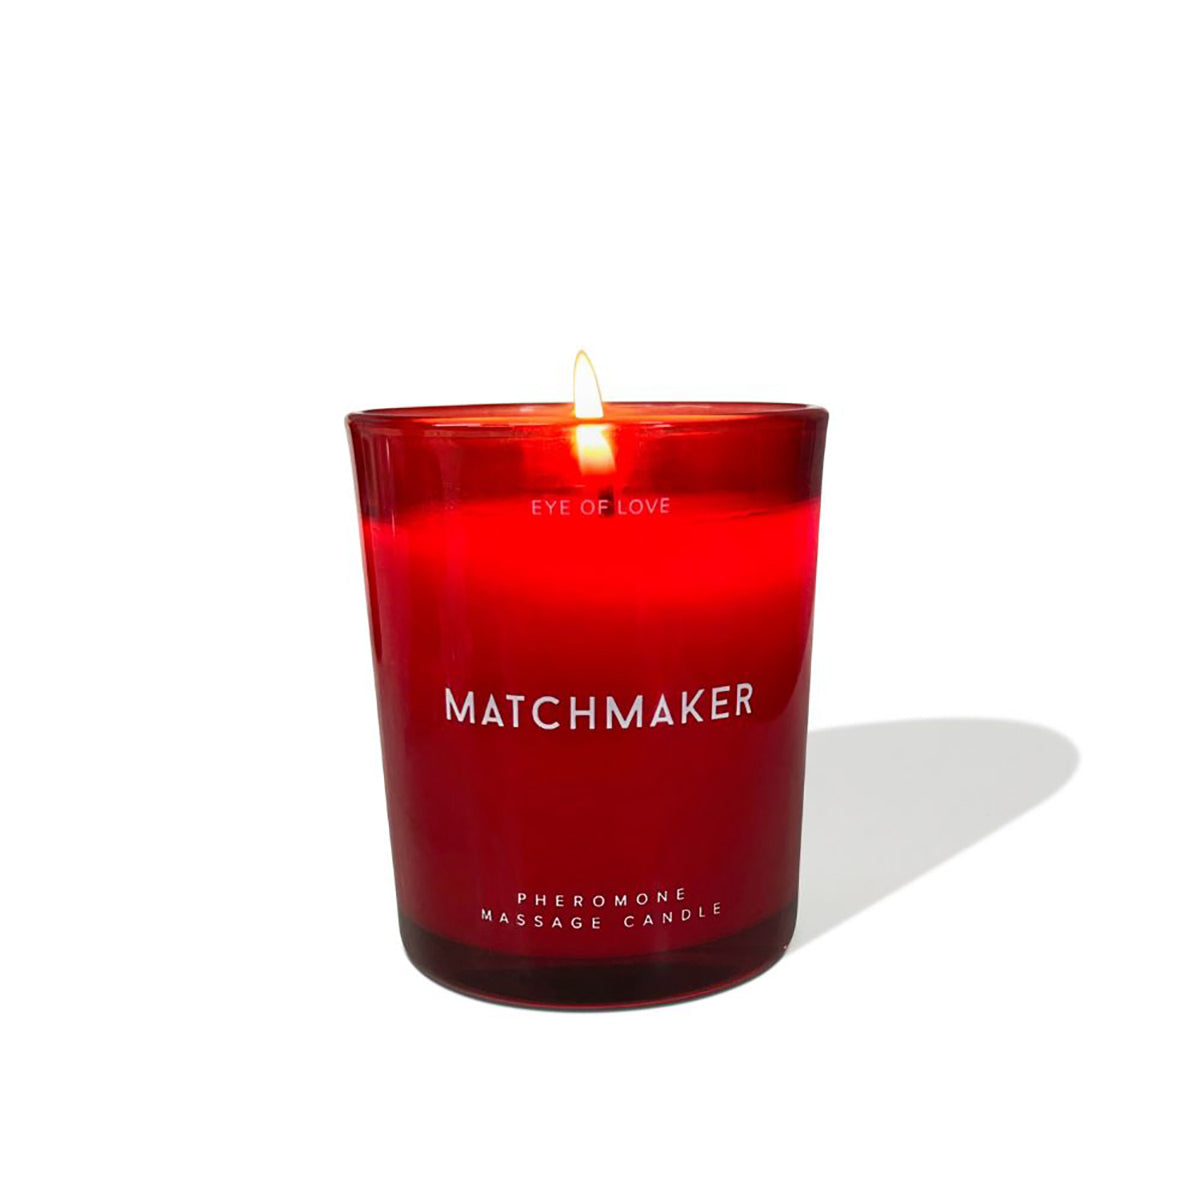 Eye of Love Matchmaker Red Diamond Massage Candle – Attract Him